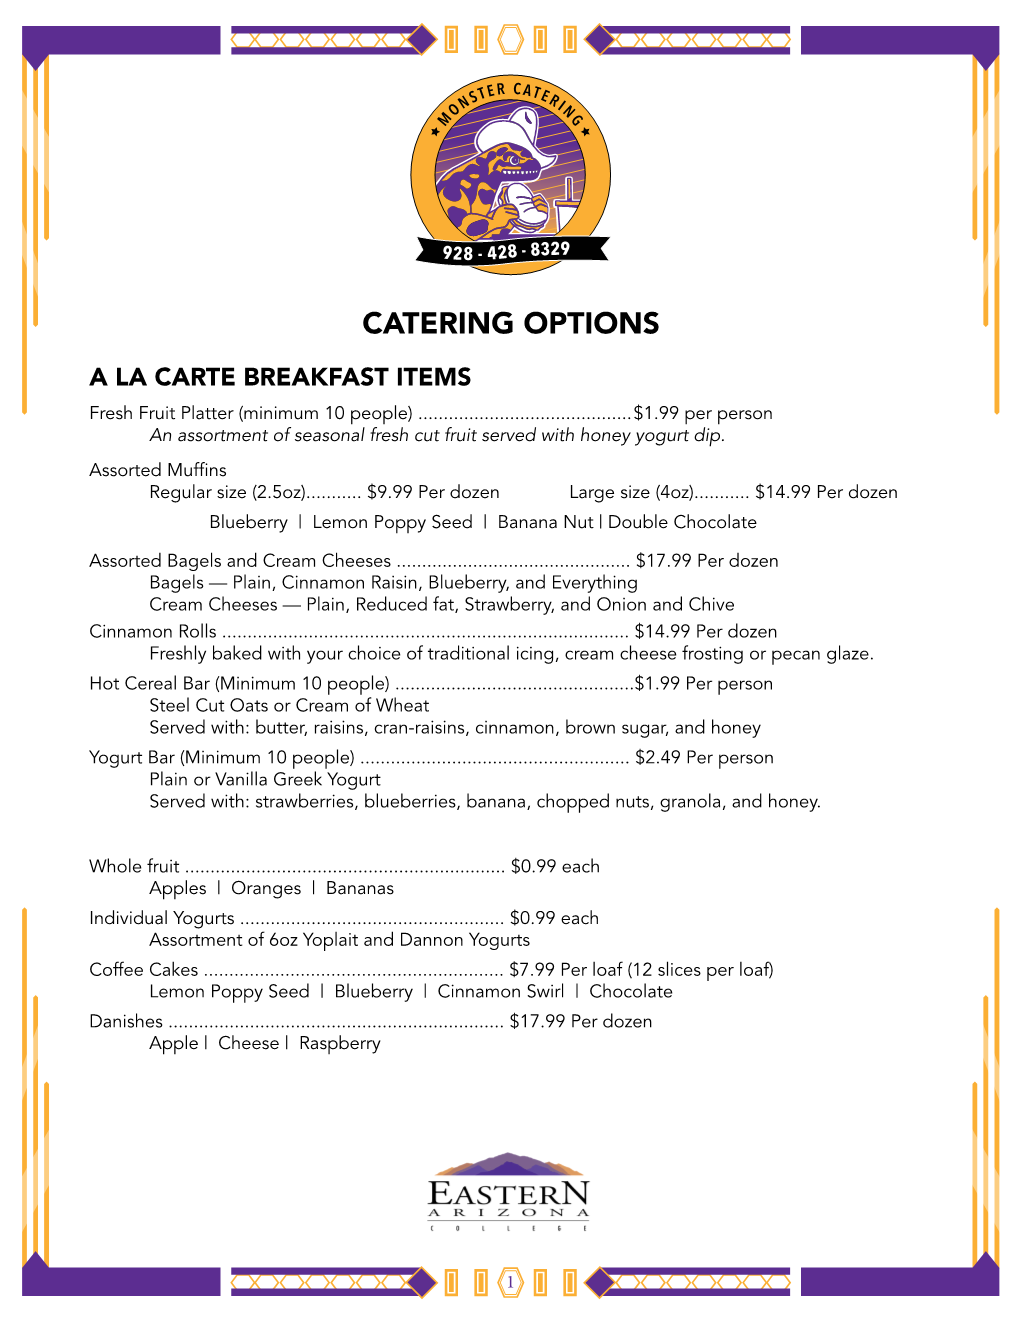 EAC Food Services Catering Menu